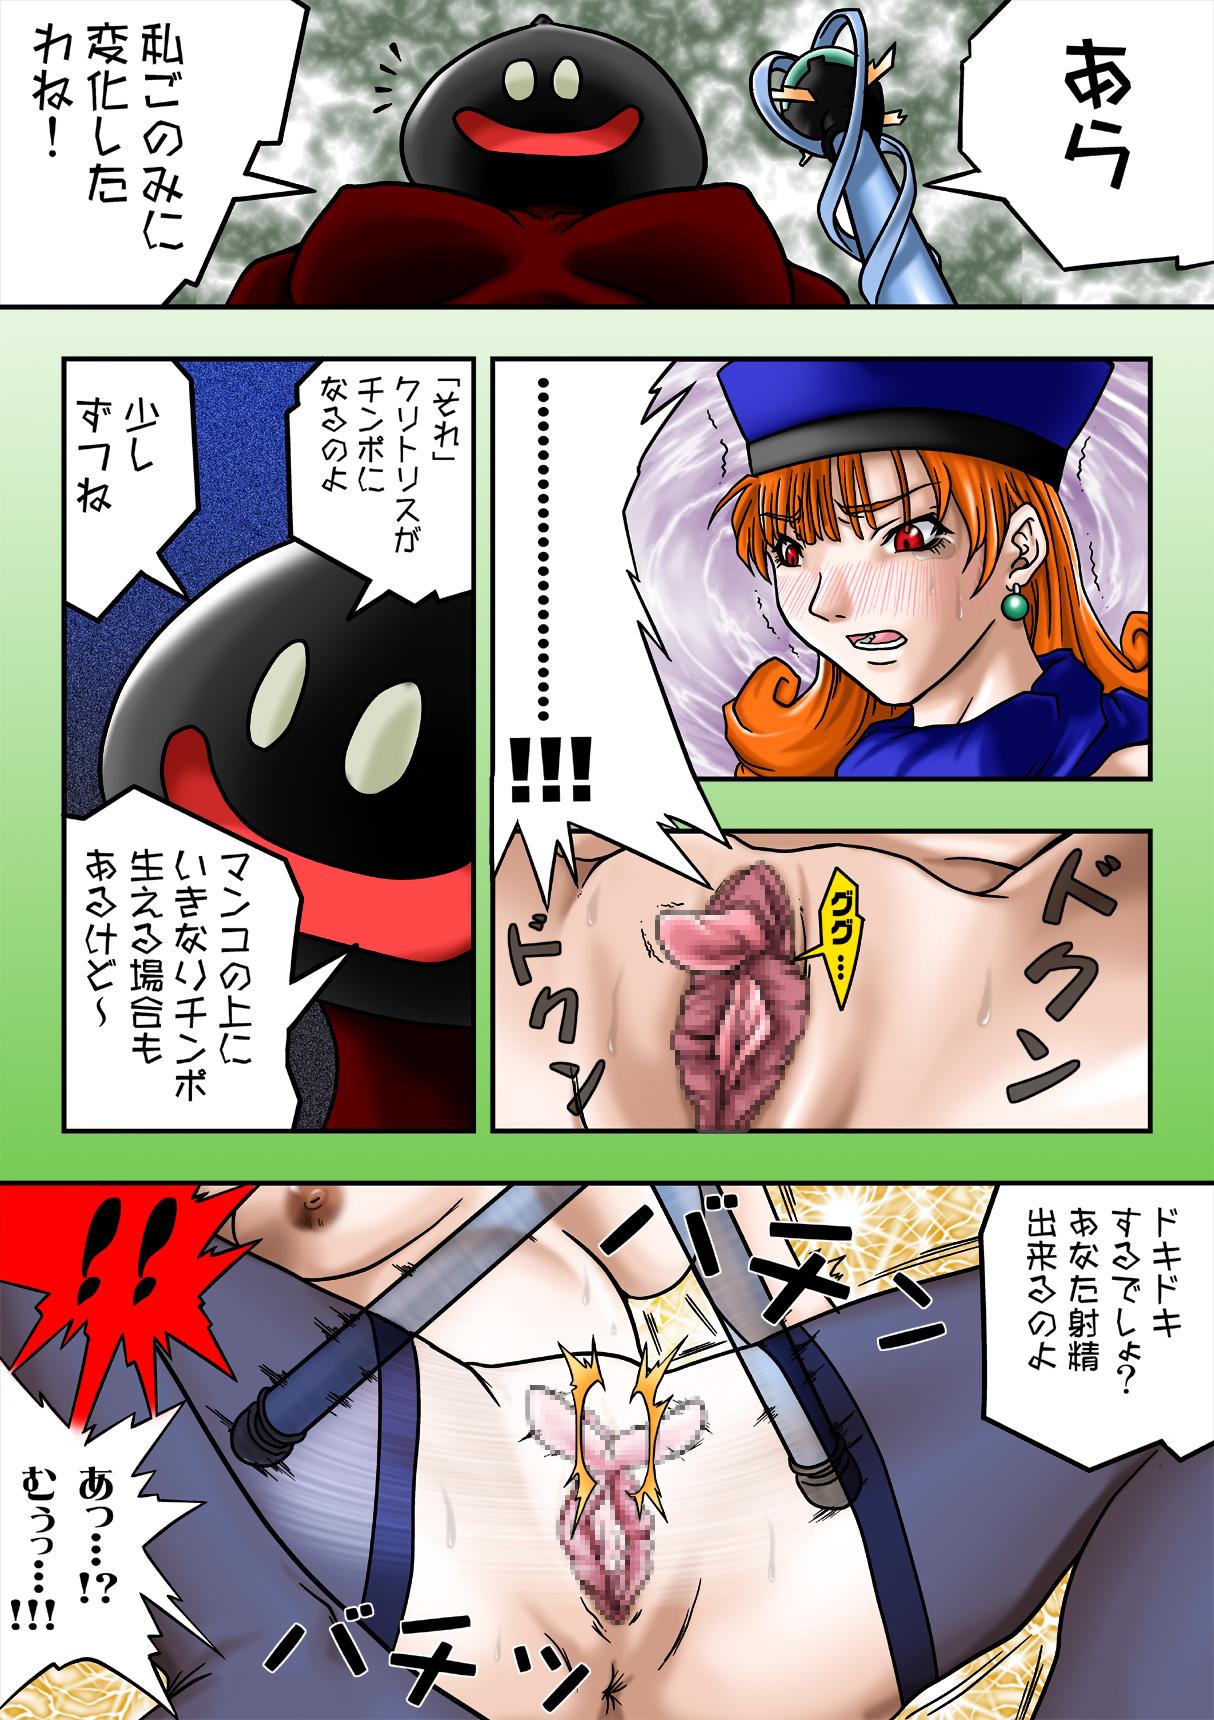 Oldvsyoung DRAI 4 - Dragon quest iv Girls - Page 2